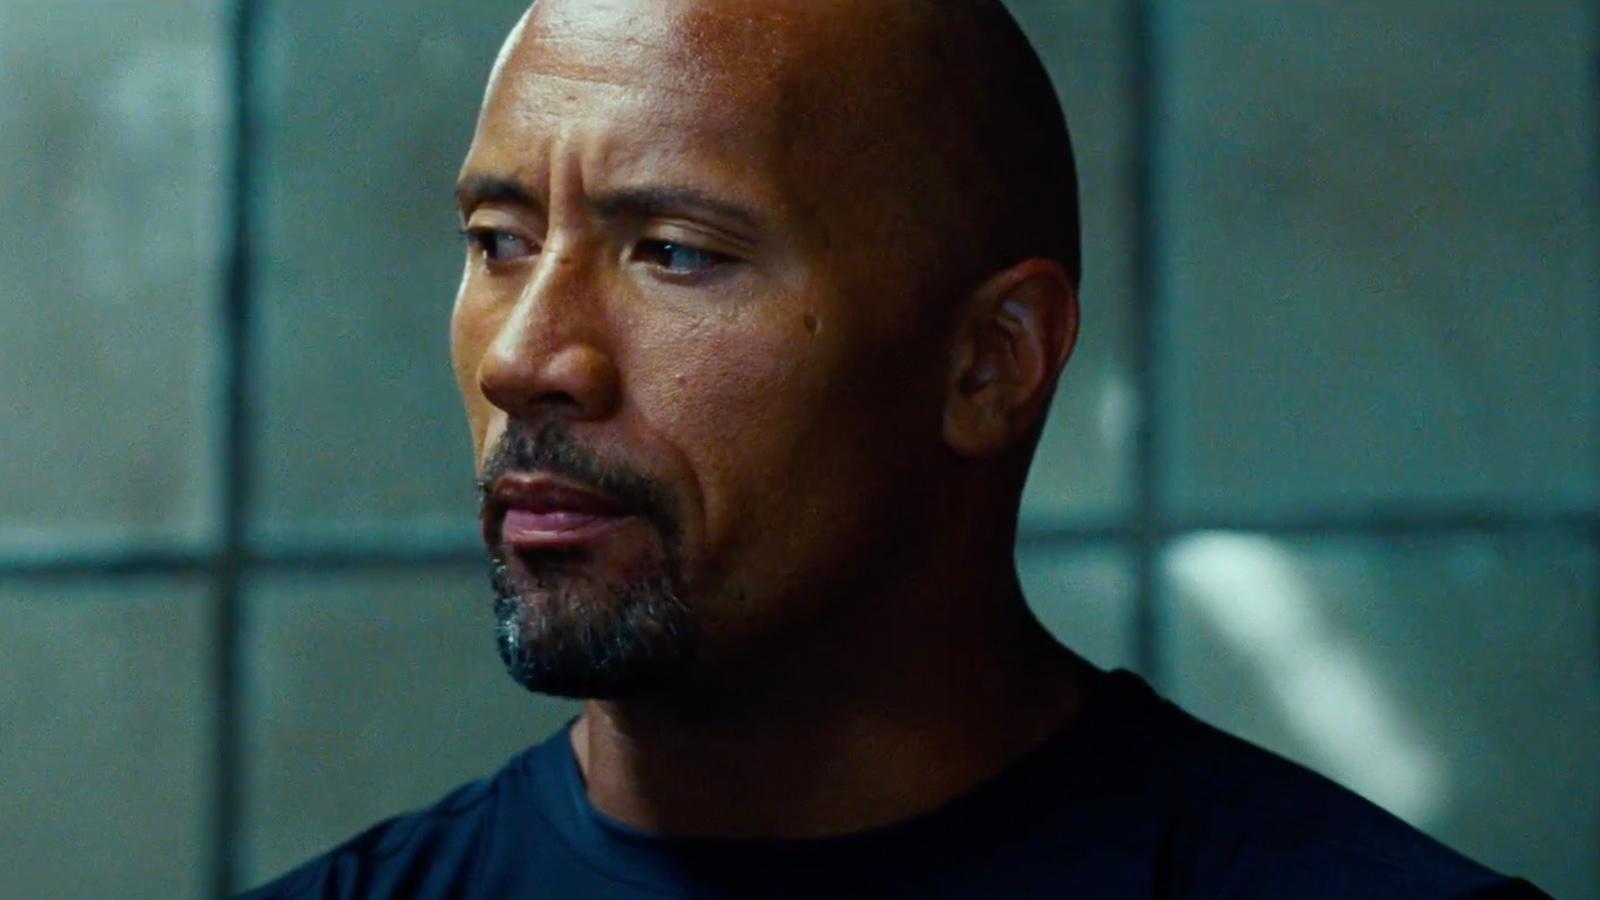 All of Dwayne 'The Rock' Johnson's Movies, Ranked From Worst to